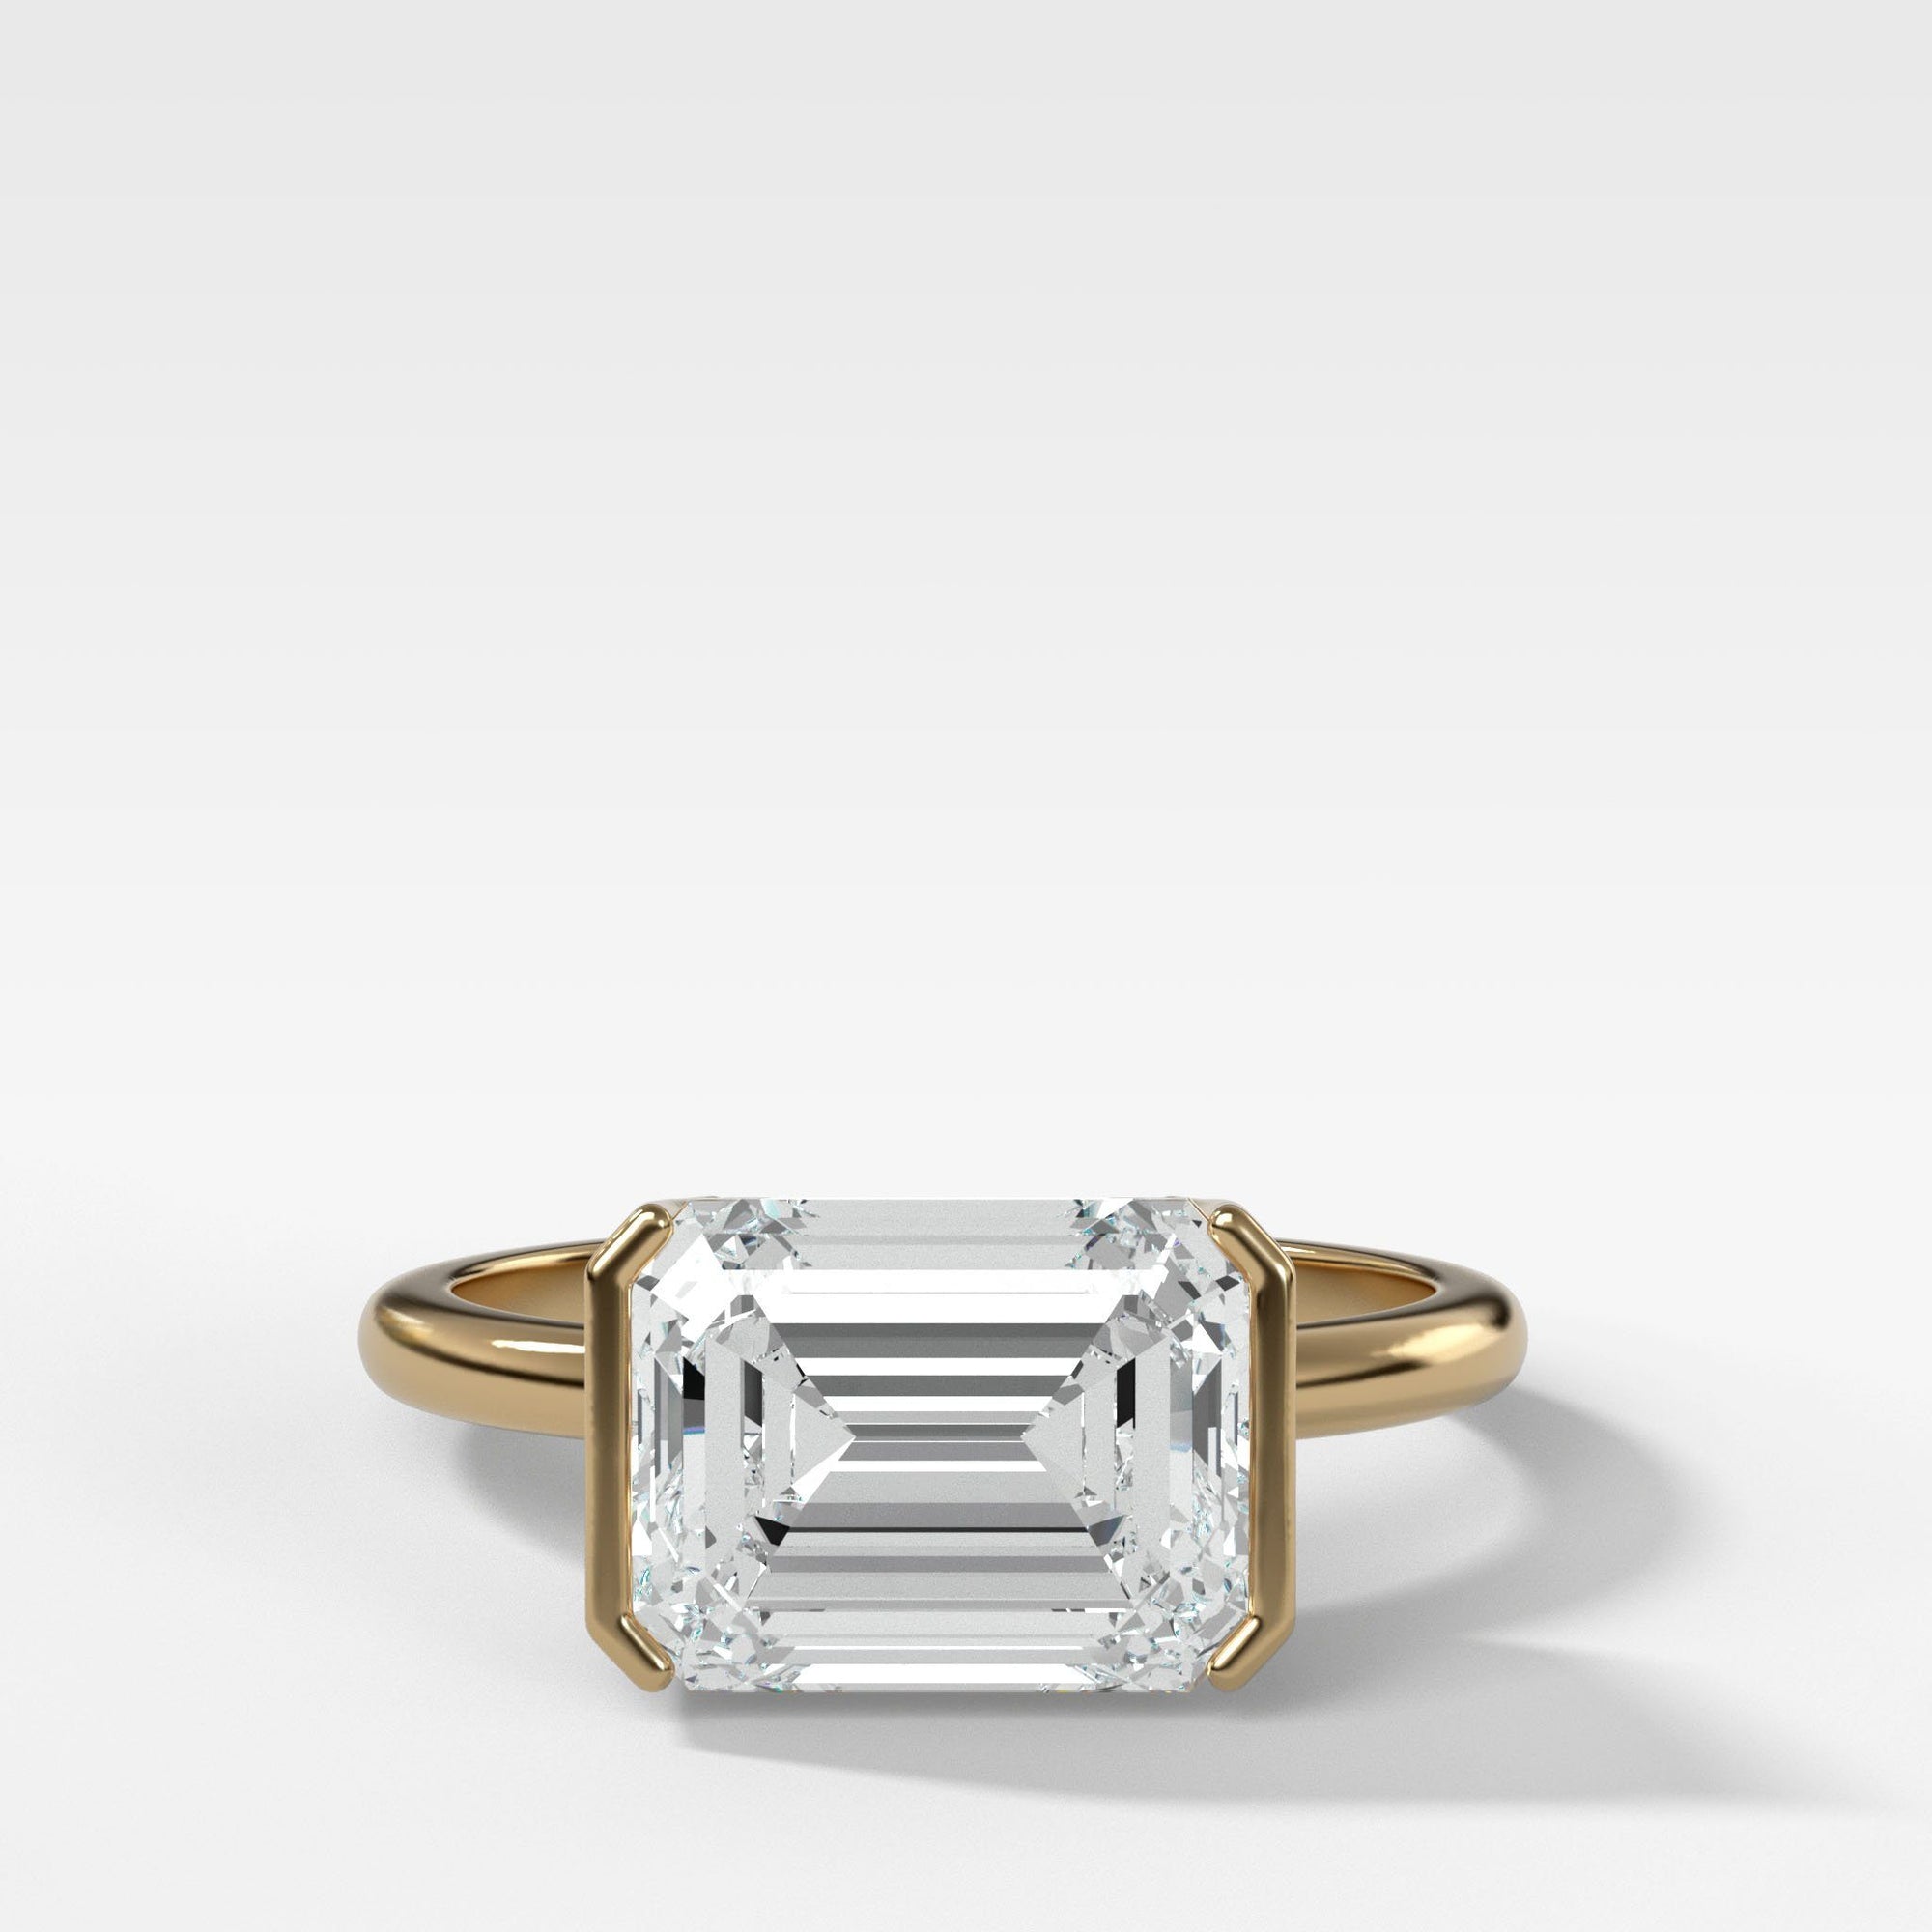 East West Half Bezel Solitaire Engagement Ring With Emerald Cut by Good Stone in Yellow Gold